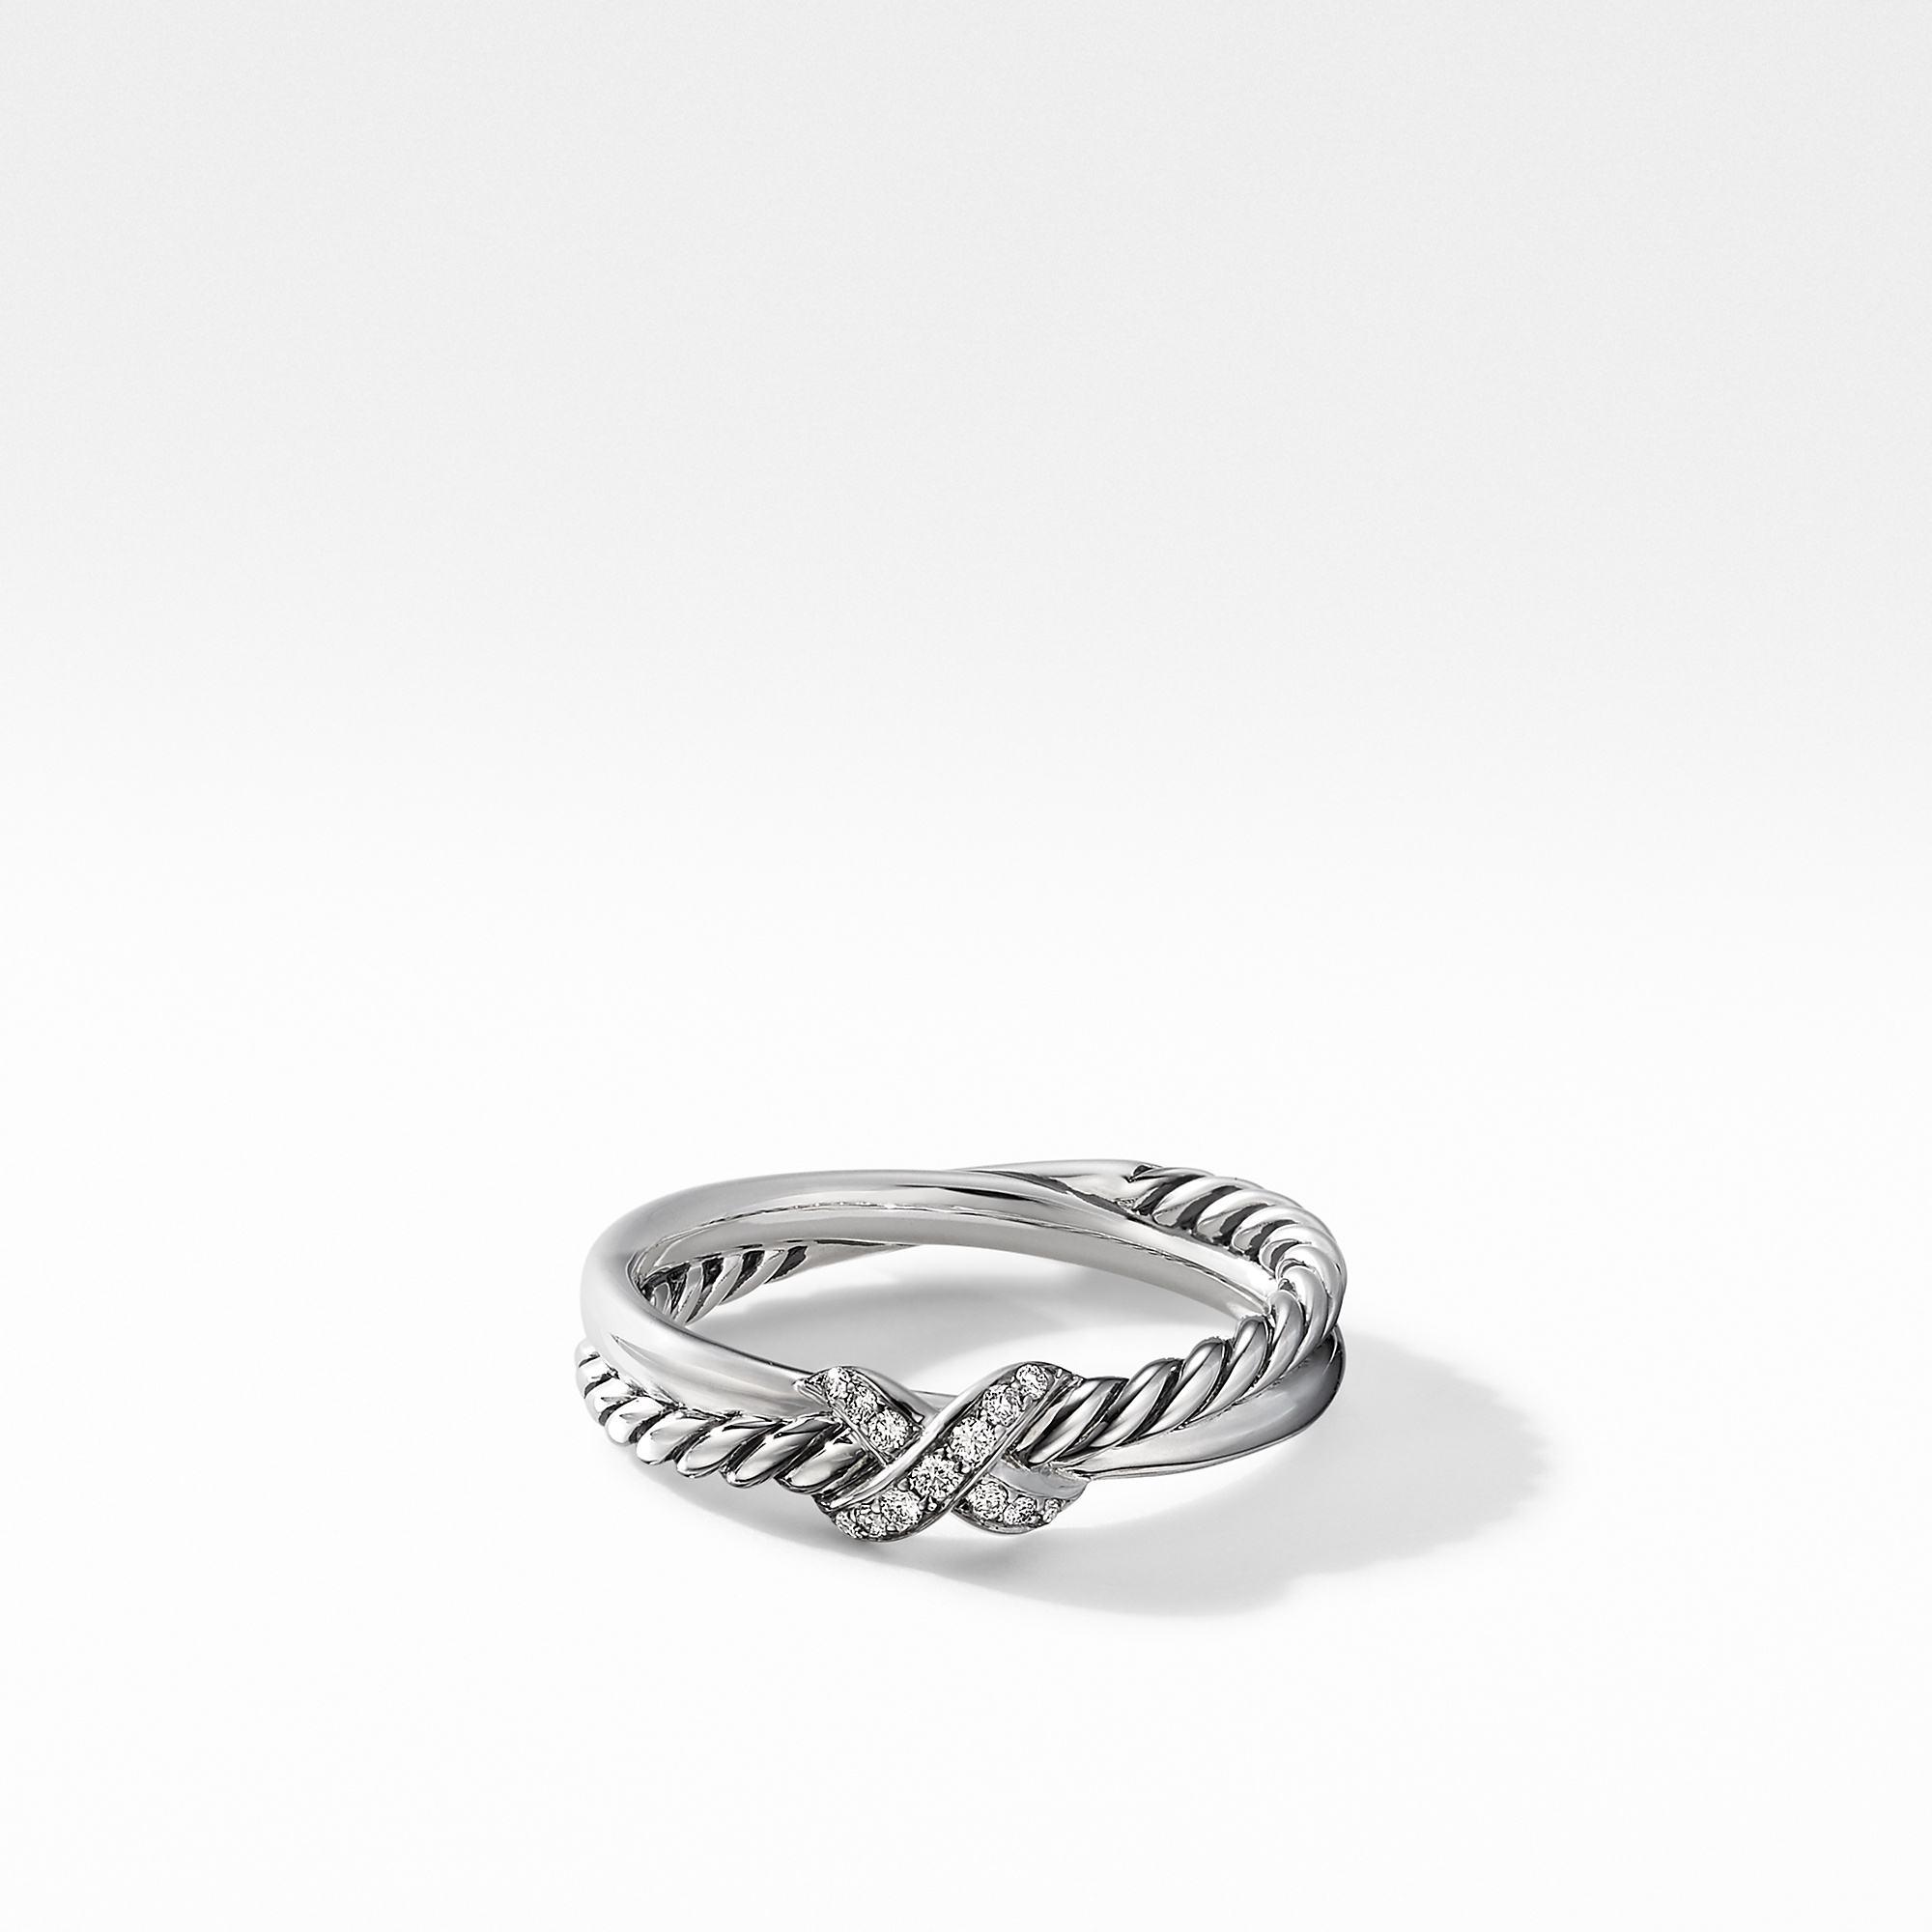 David Yurman Petite X Crossover Ring in Sterling Silver with Pave Diamonds, size 6 0